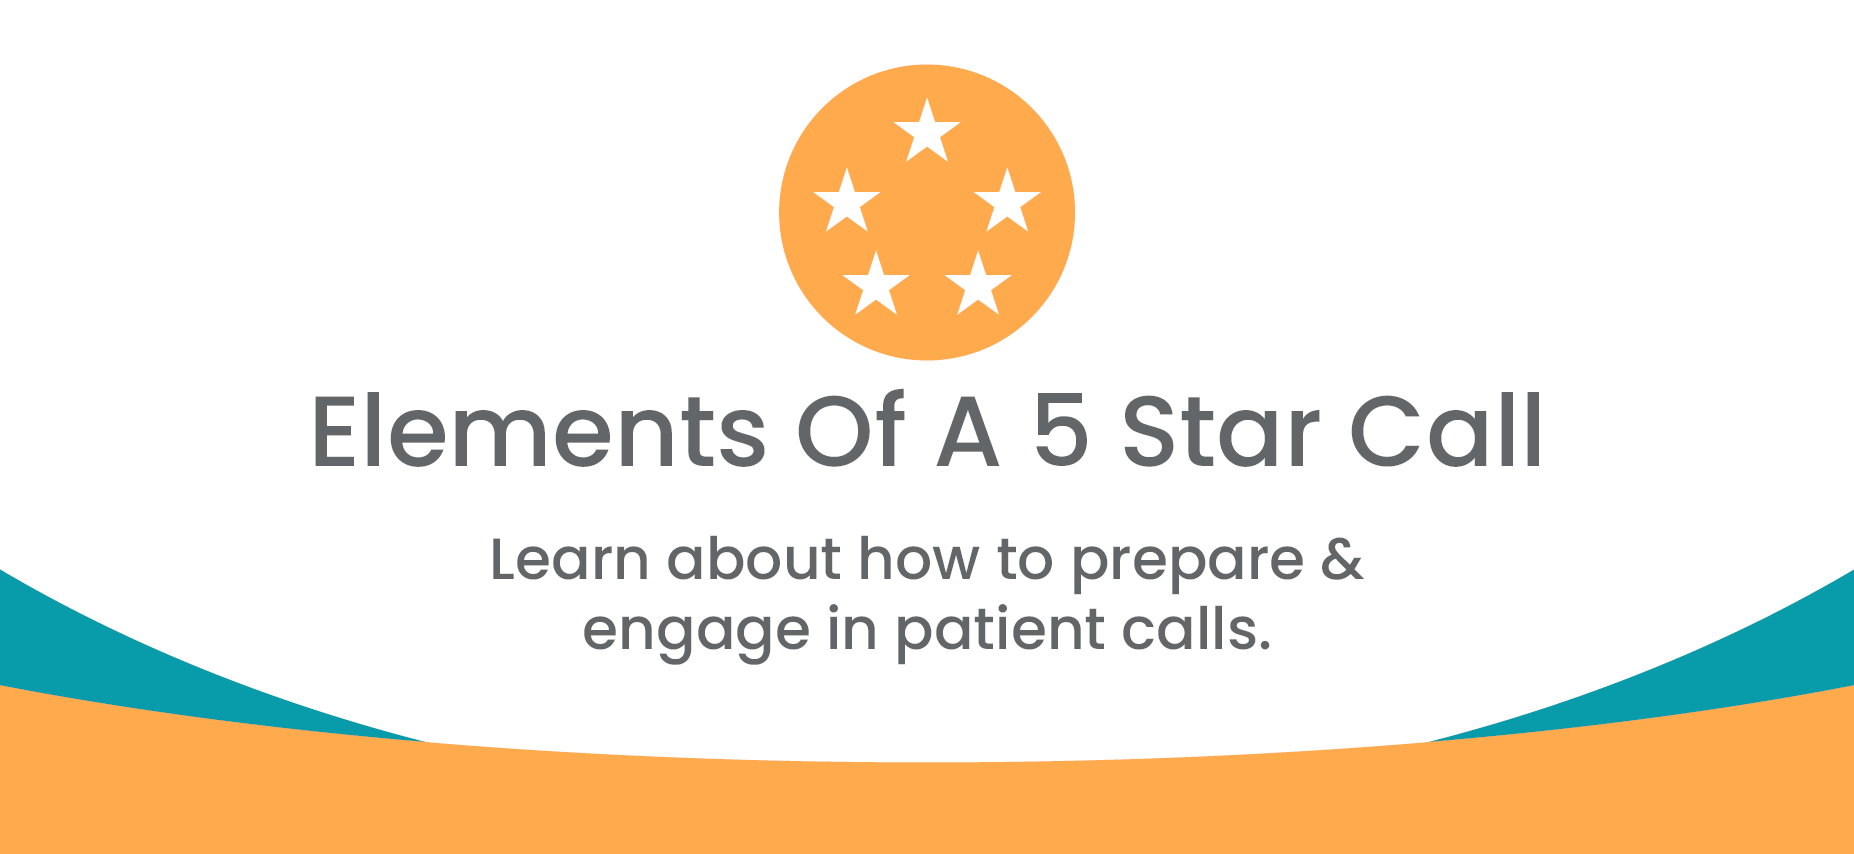 Elements of a 5 Star Call